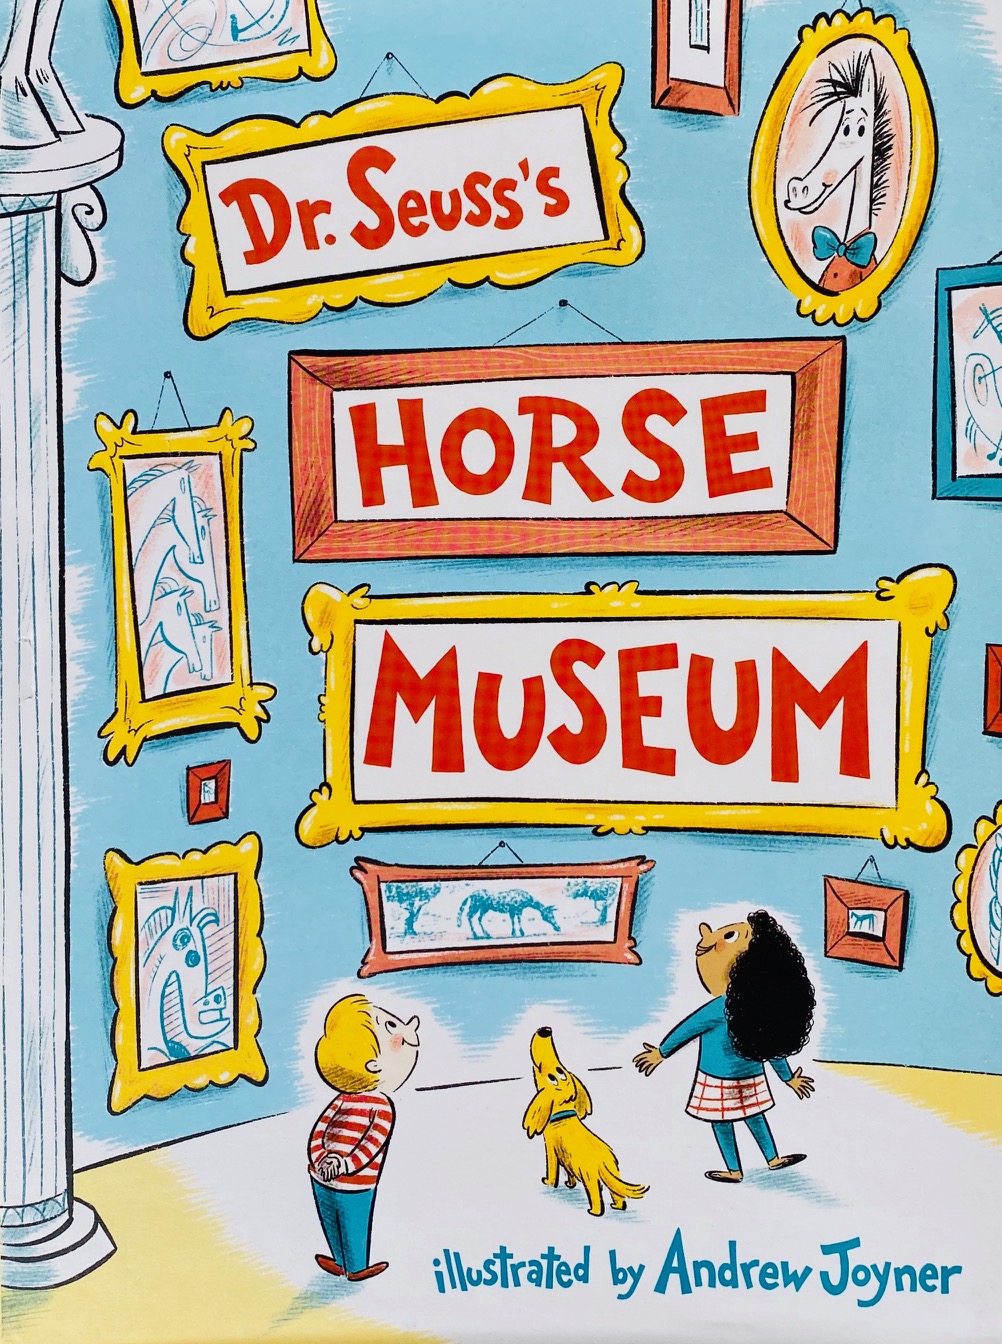 children's art book about representations of horses in art throughout history